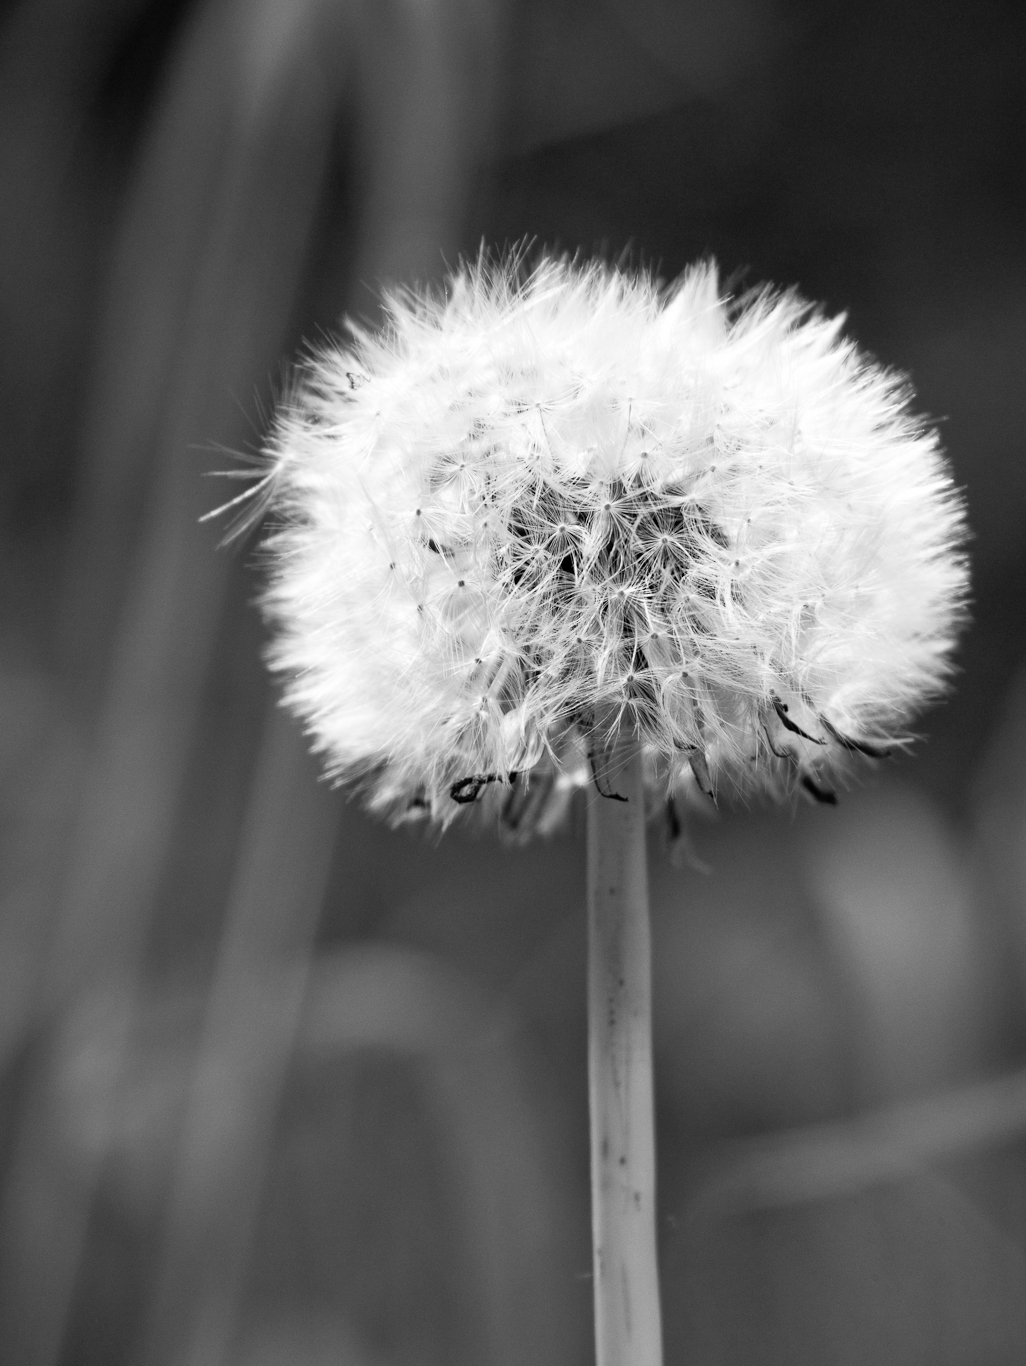 a black and white image of a dandelion in full bloom